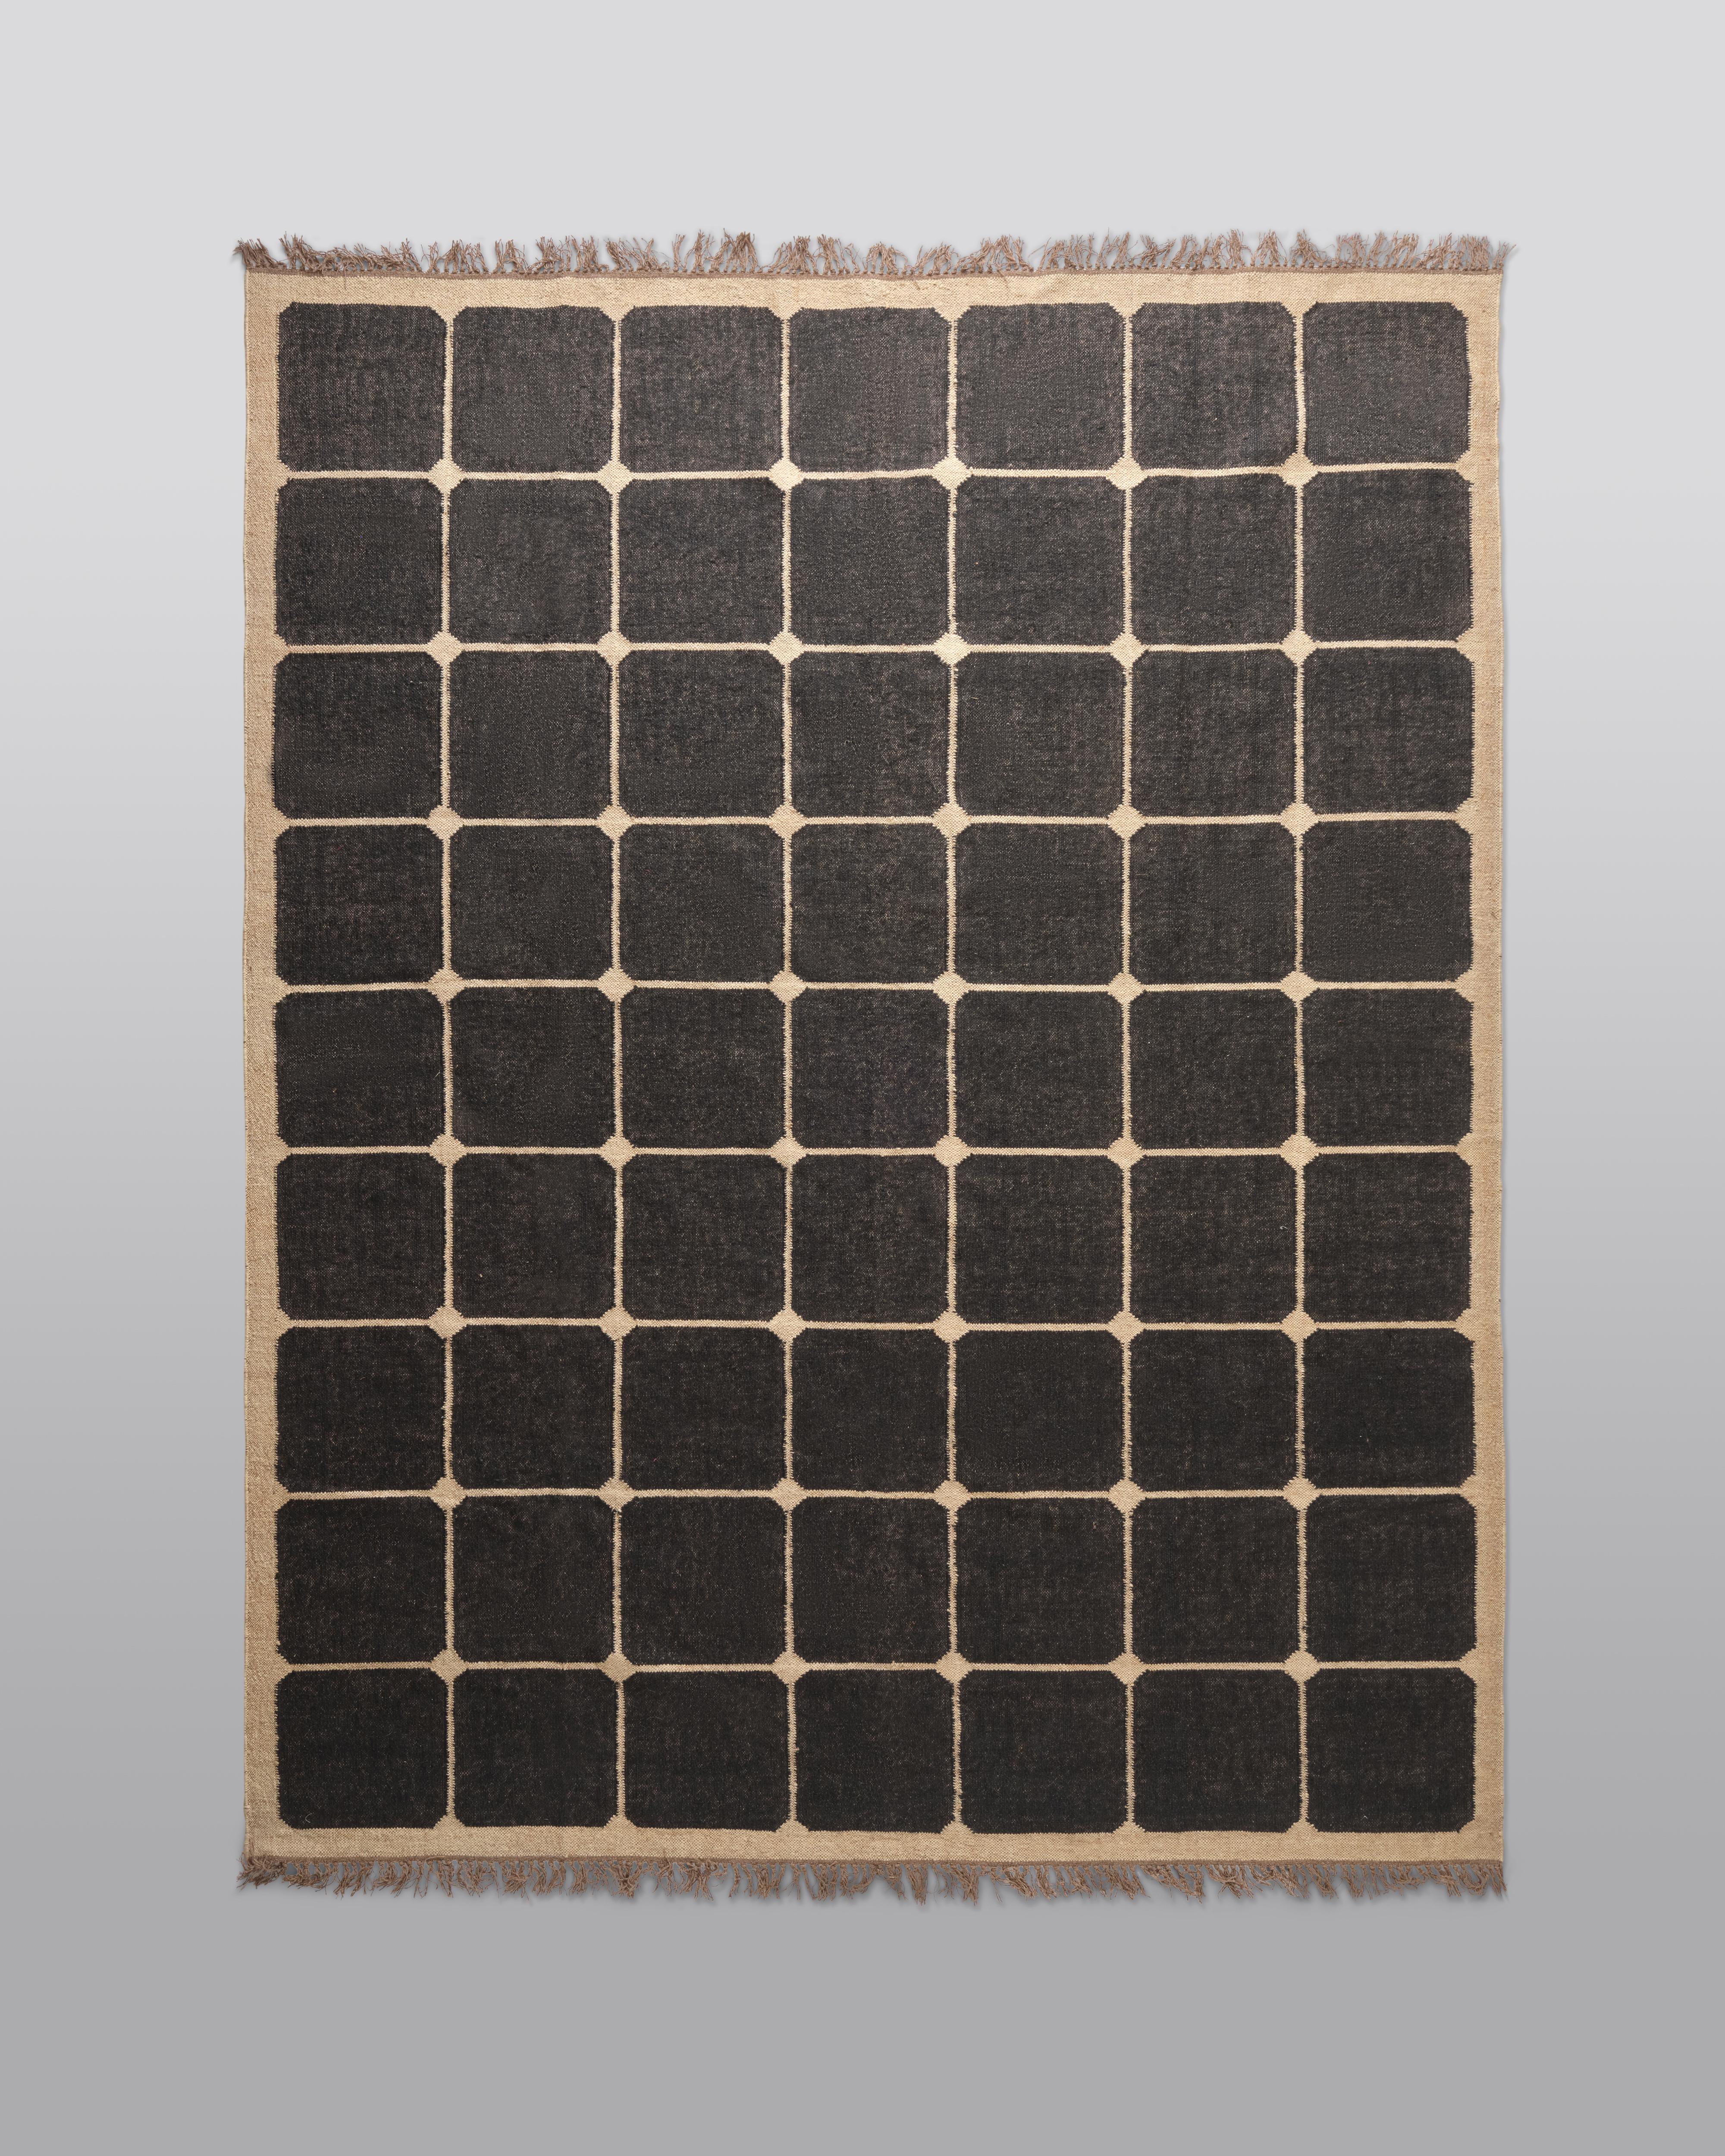 Wool The Forsyth Checkerboard Rug - Dark Tile Checks in Off Black, 8x10  For Sale